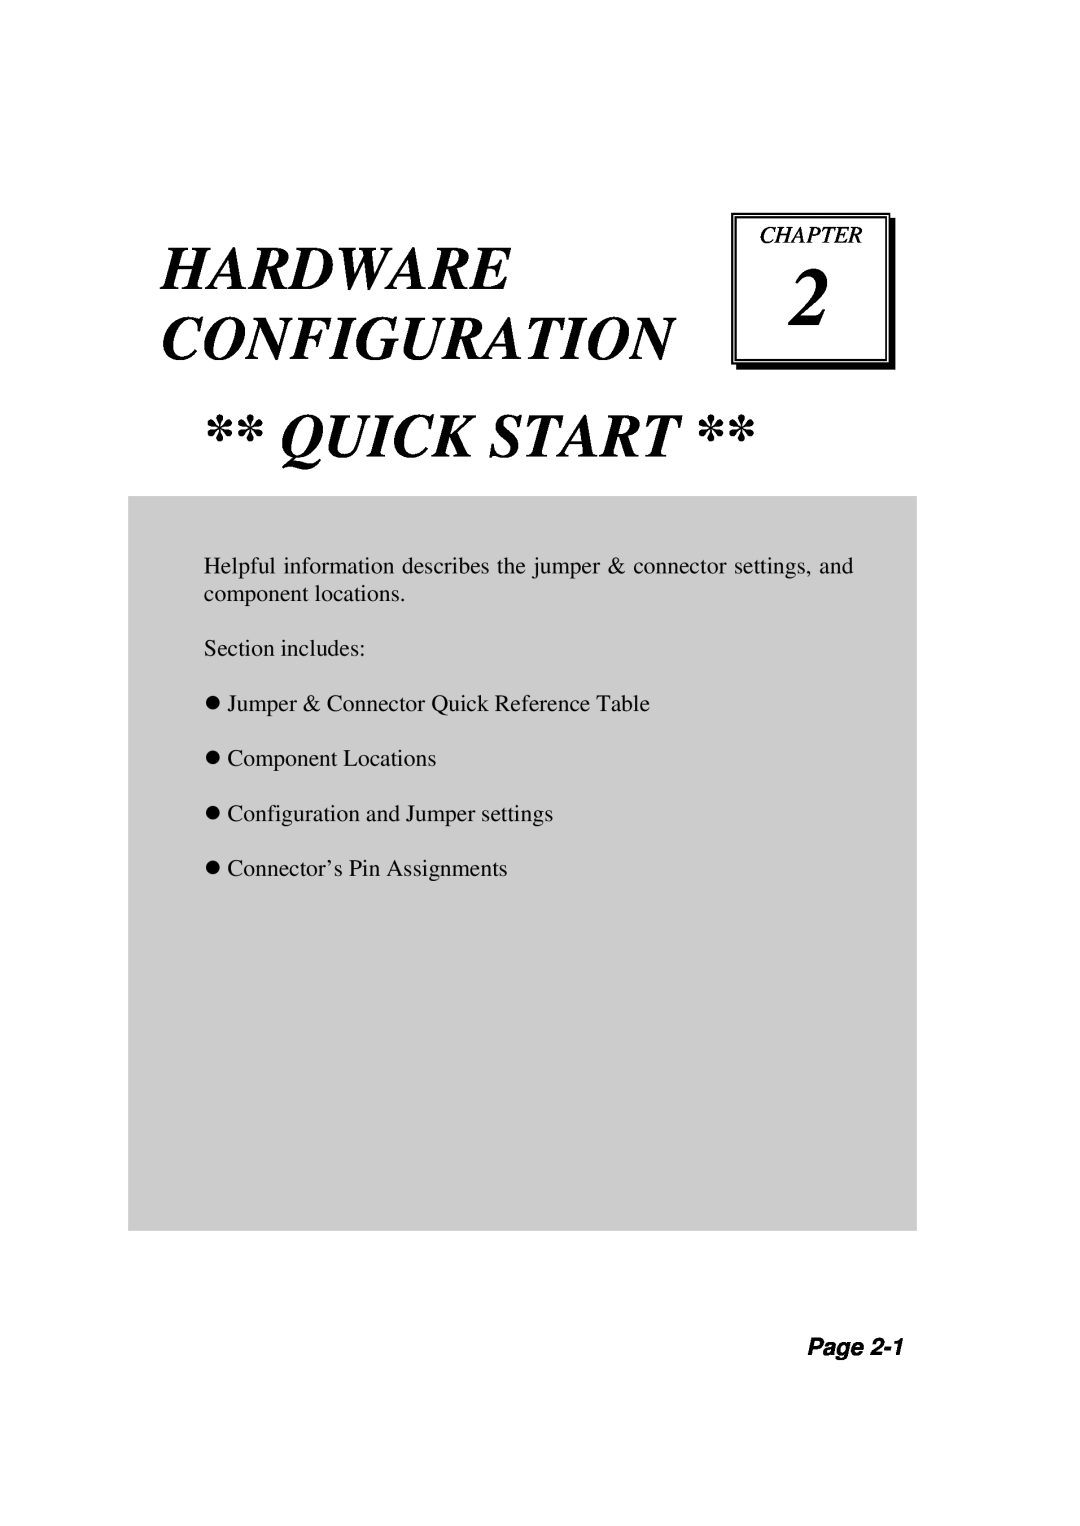 Intel PMB-601LF user manual Hardware, Configuration, Quick Start, Chapter, Page 